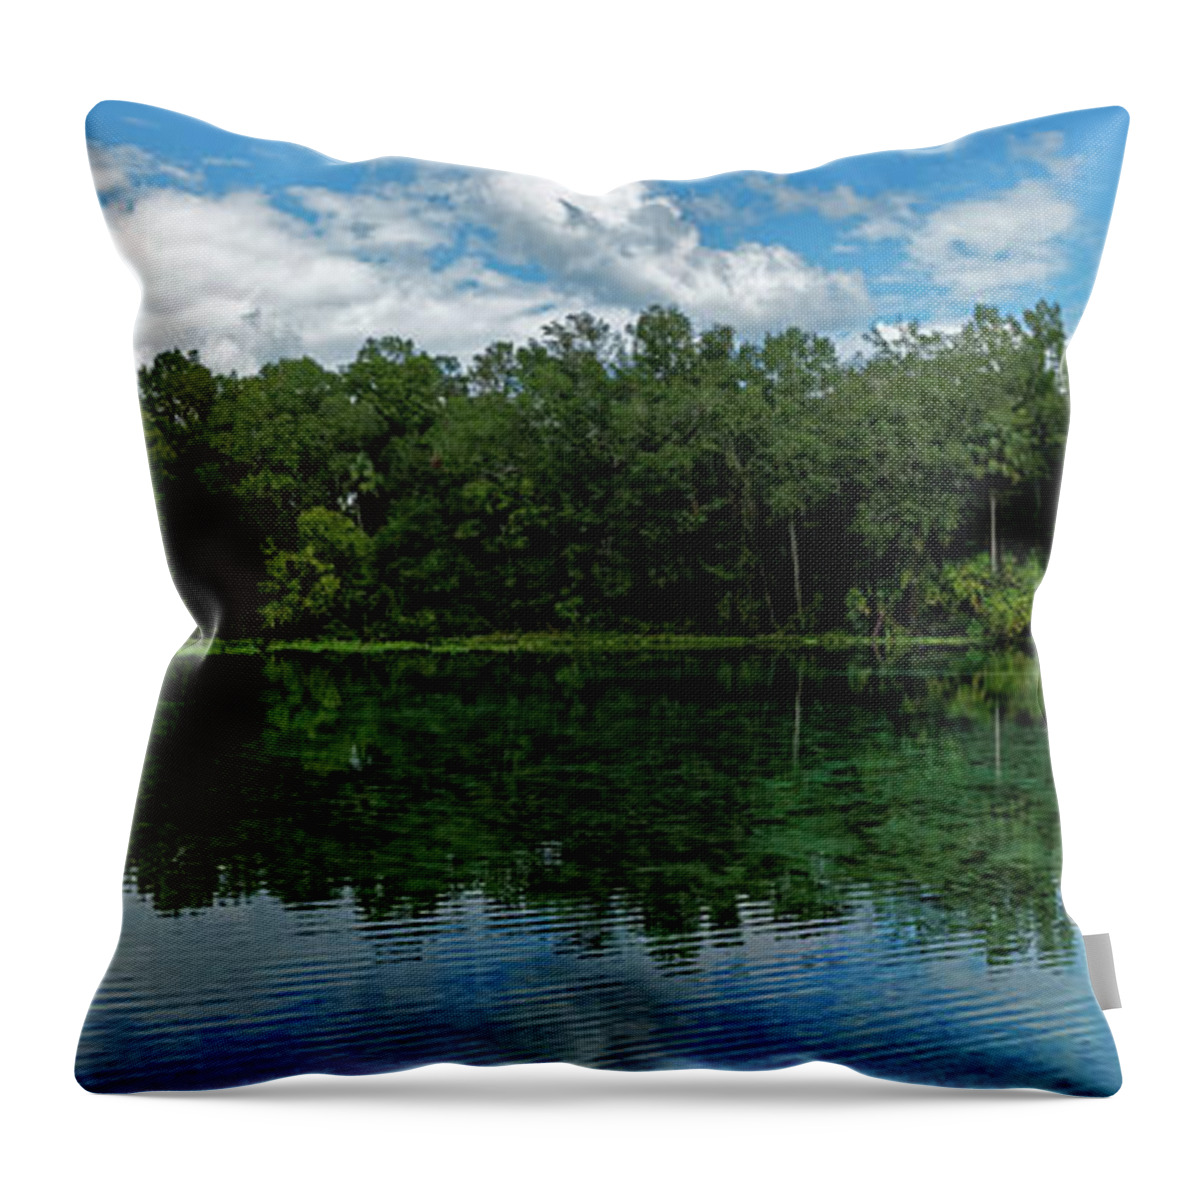 Alexander Springs Pool Throw Pillow featuring the photograph Alexander Springs Pool by Paul Mashburn